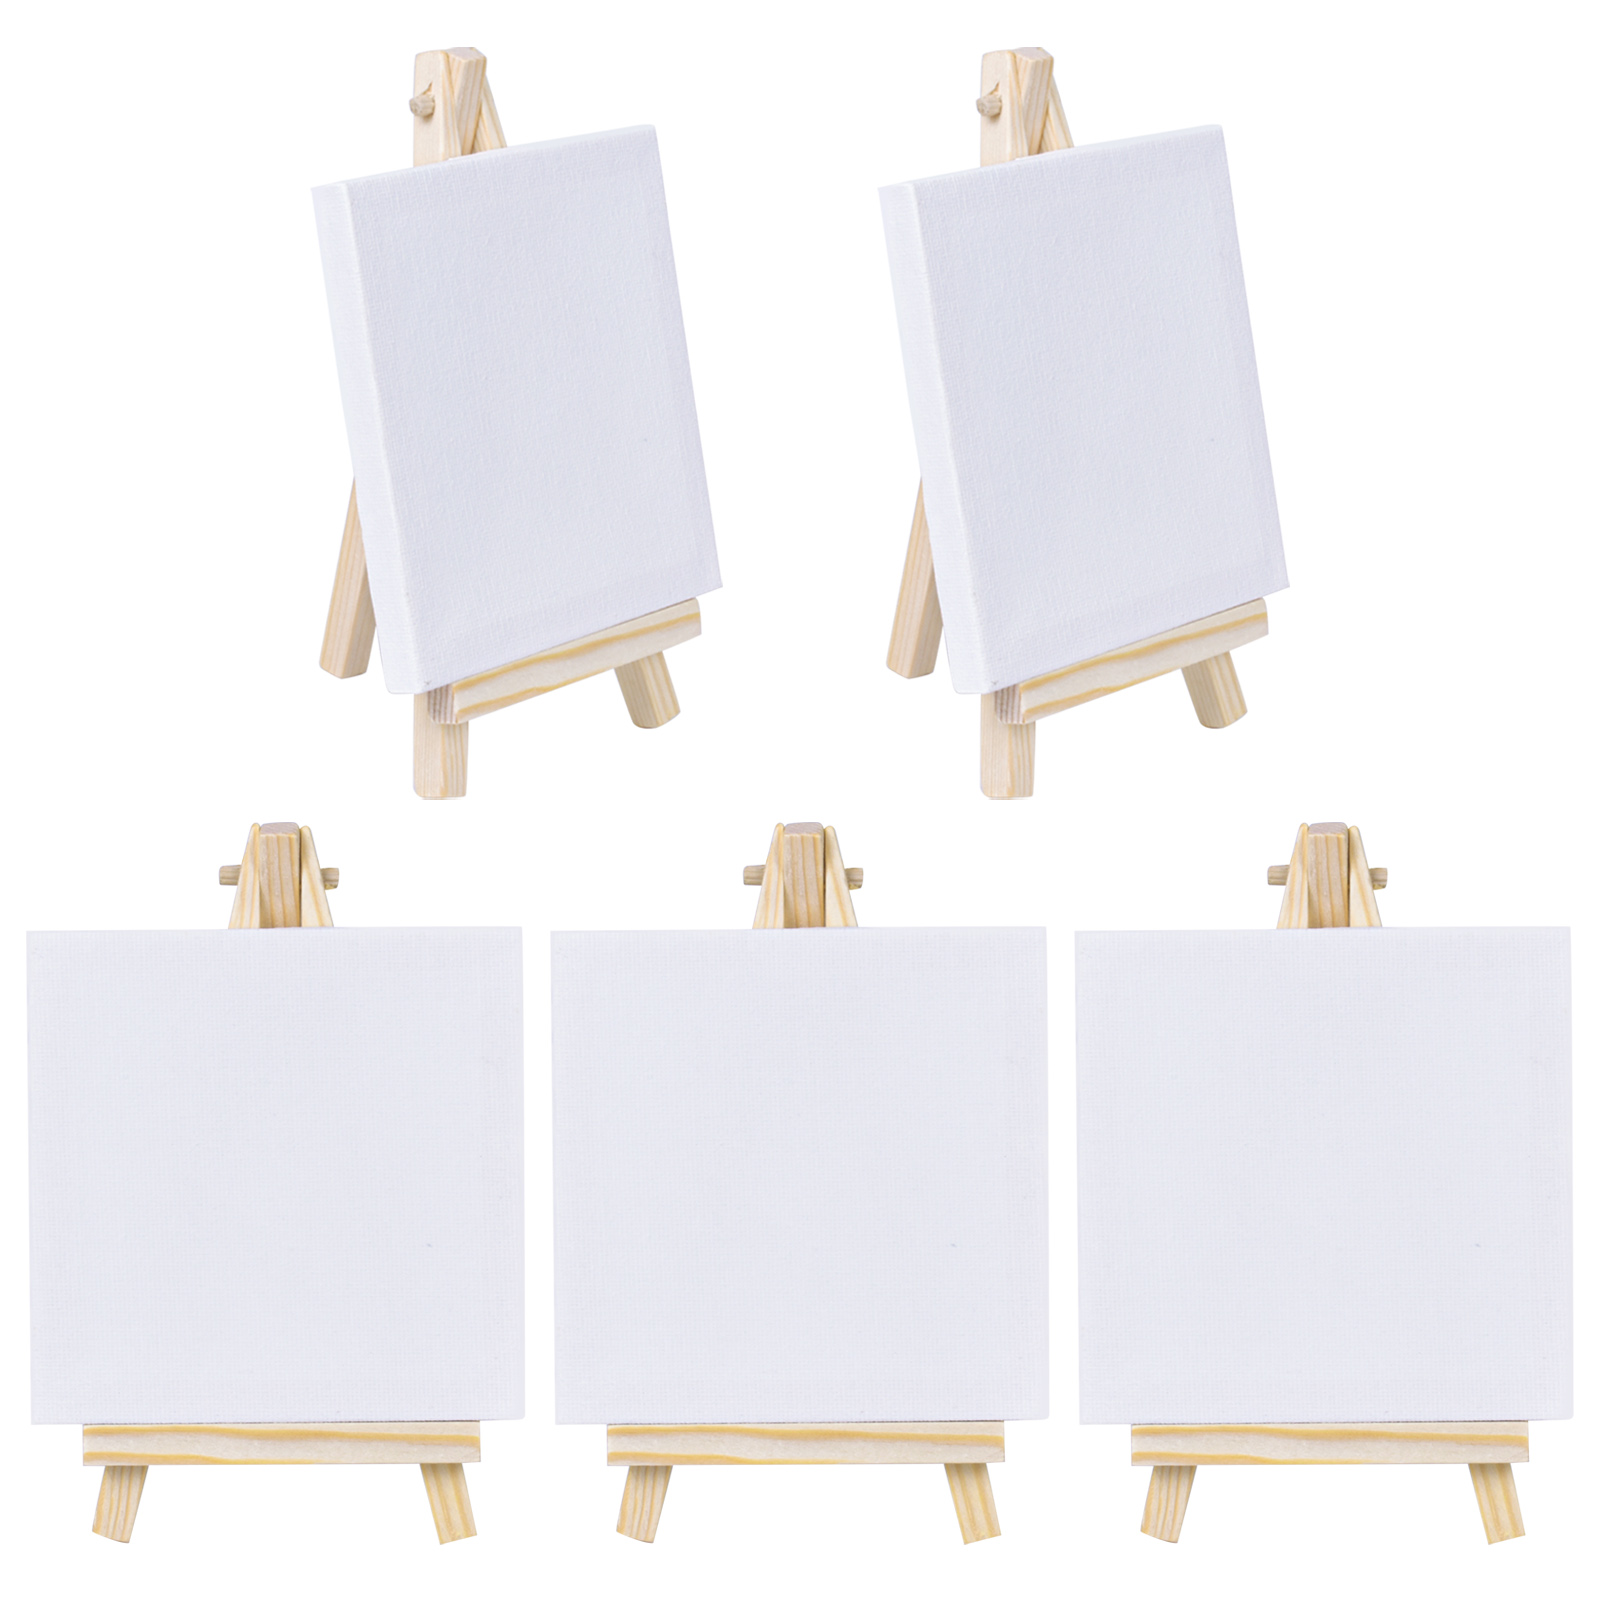 Mini Wooden Easels, Wedding Easels,table Centre Pieces,2 Table